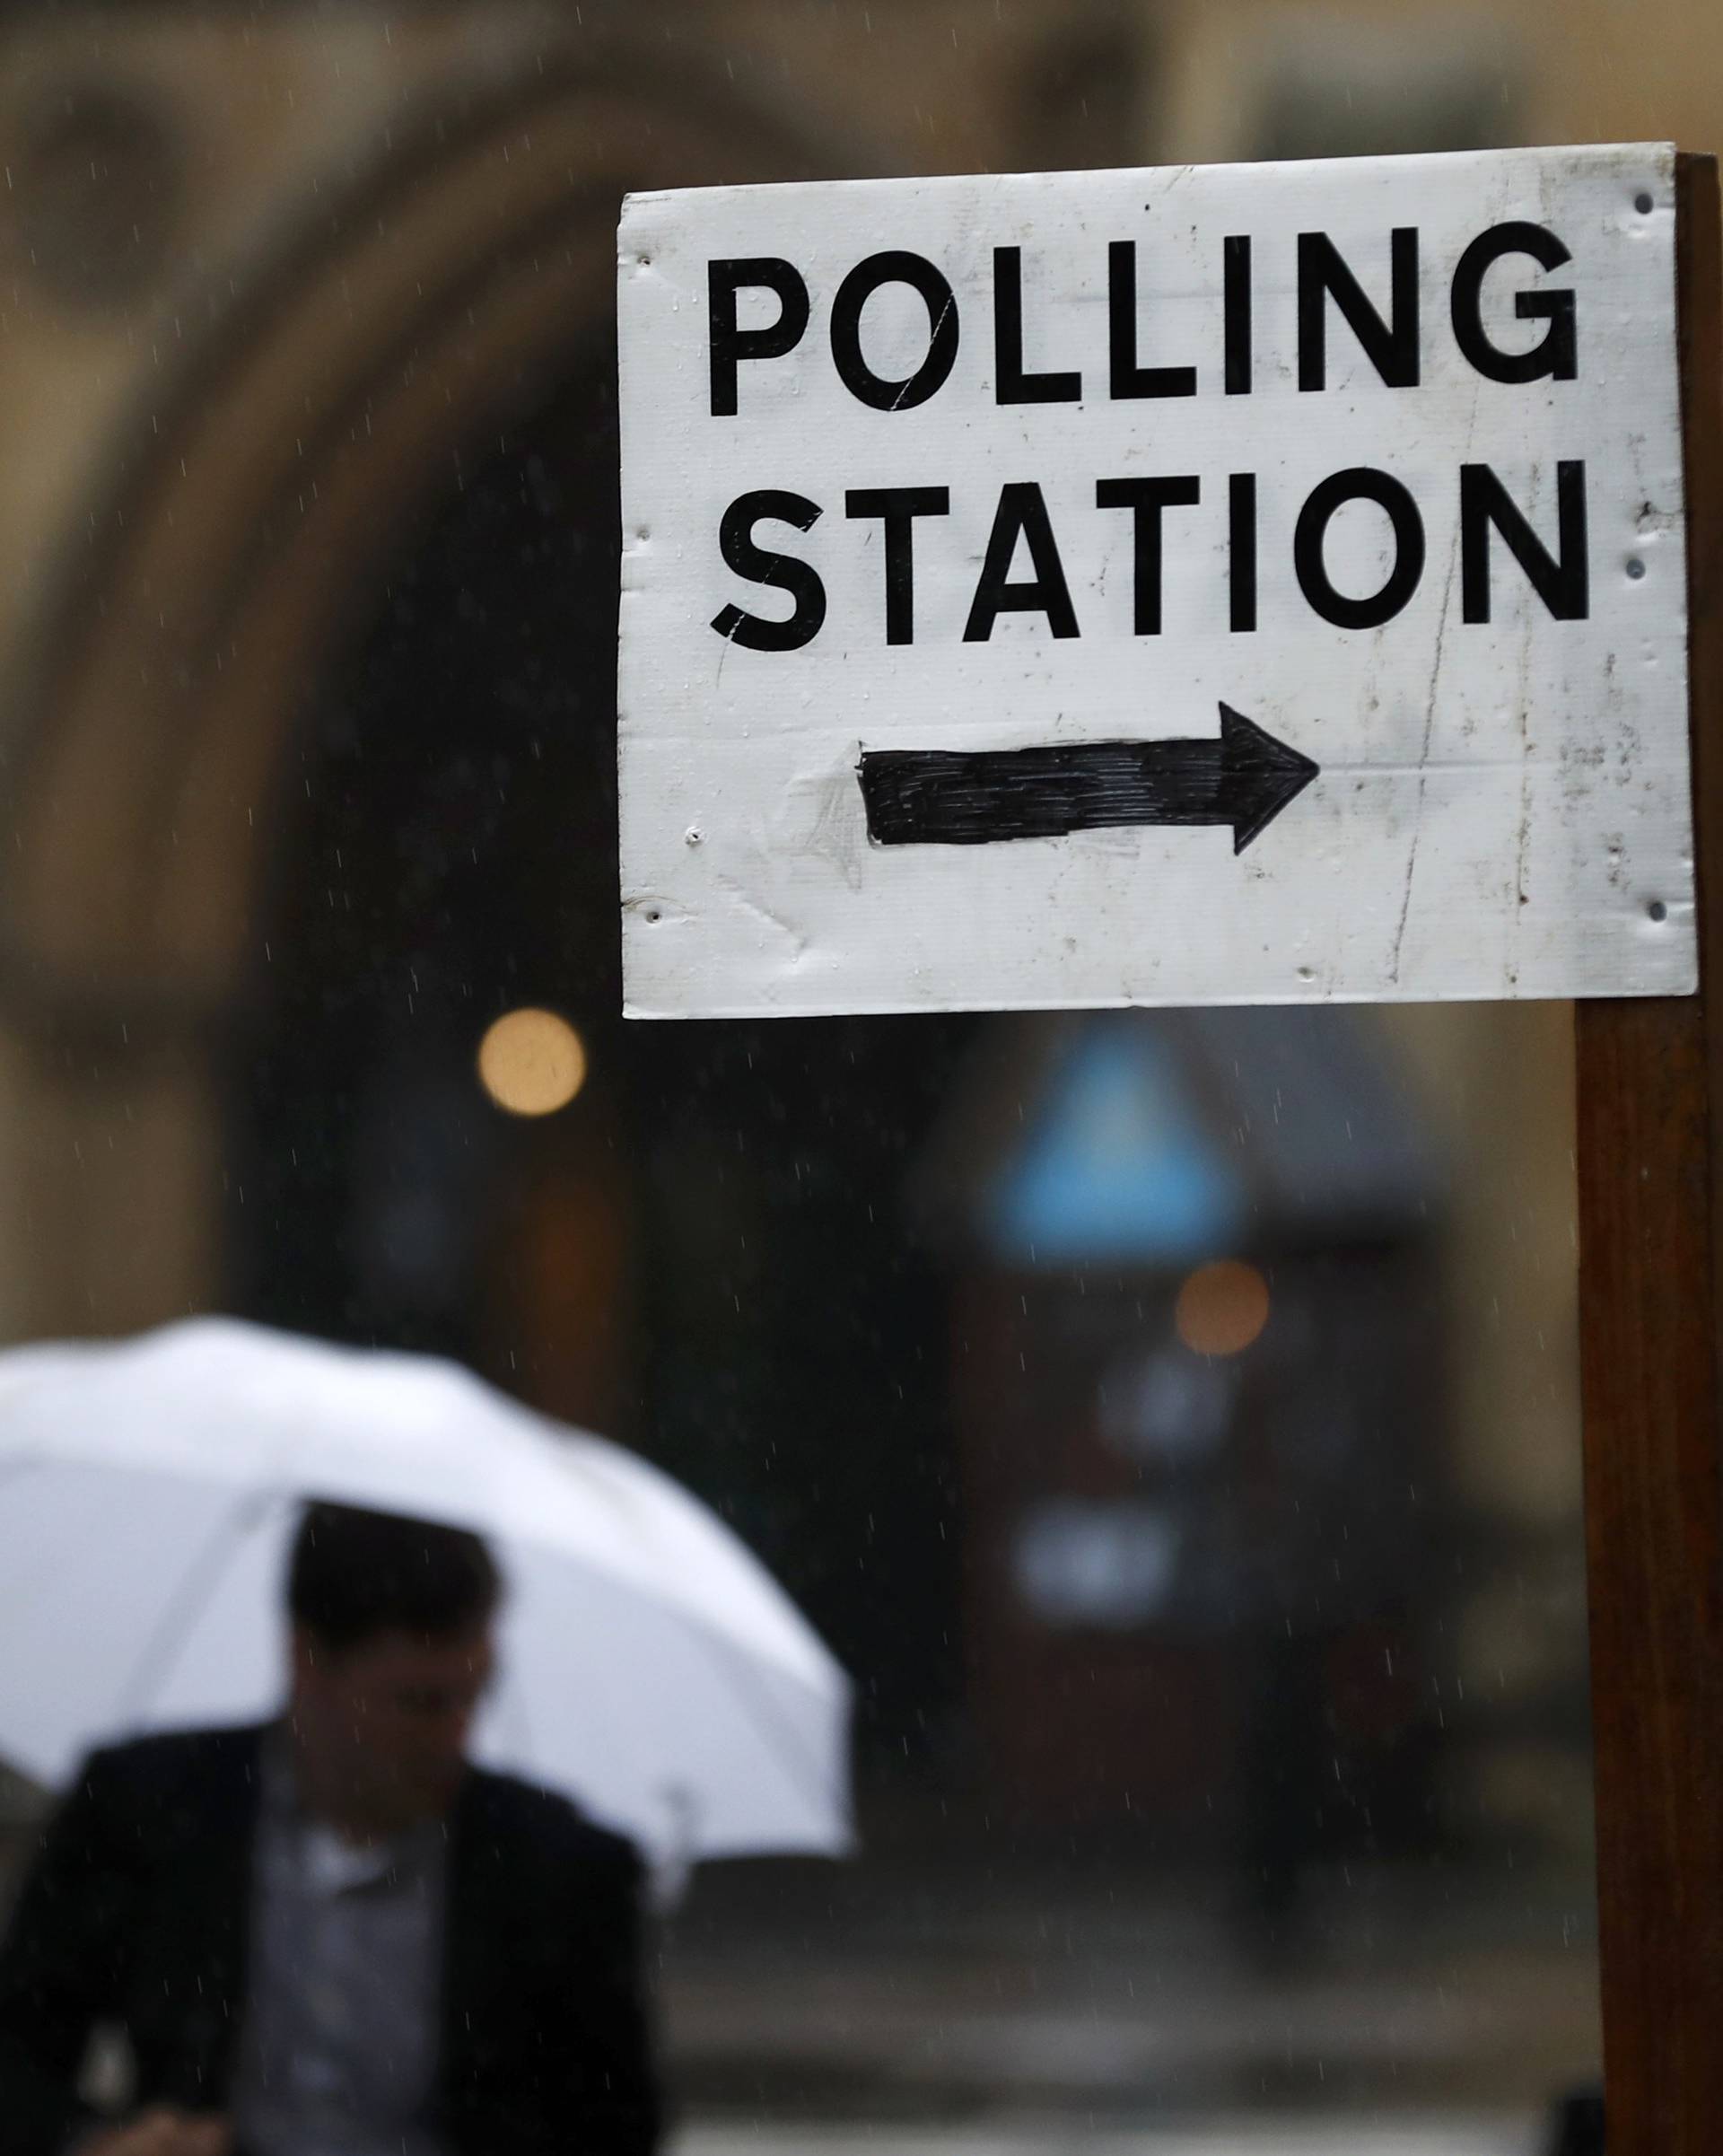 A man carries an umbrella past a polling station for the Referendum on the European Union in central London, Britain